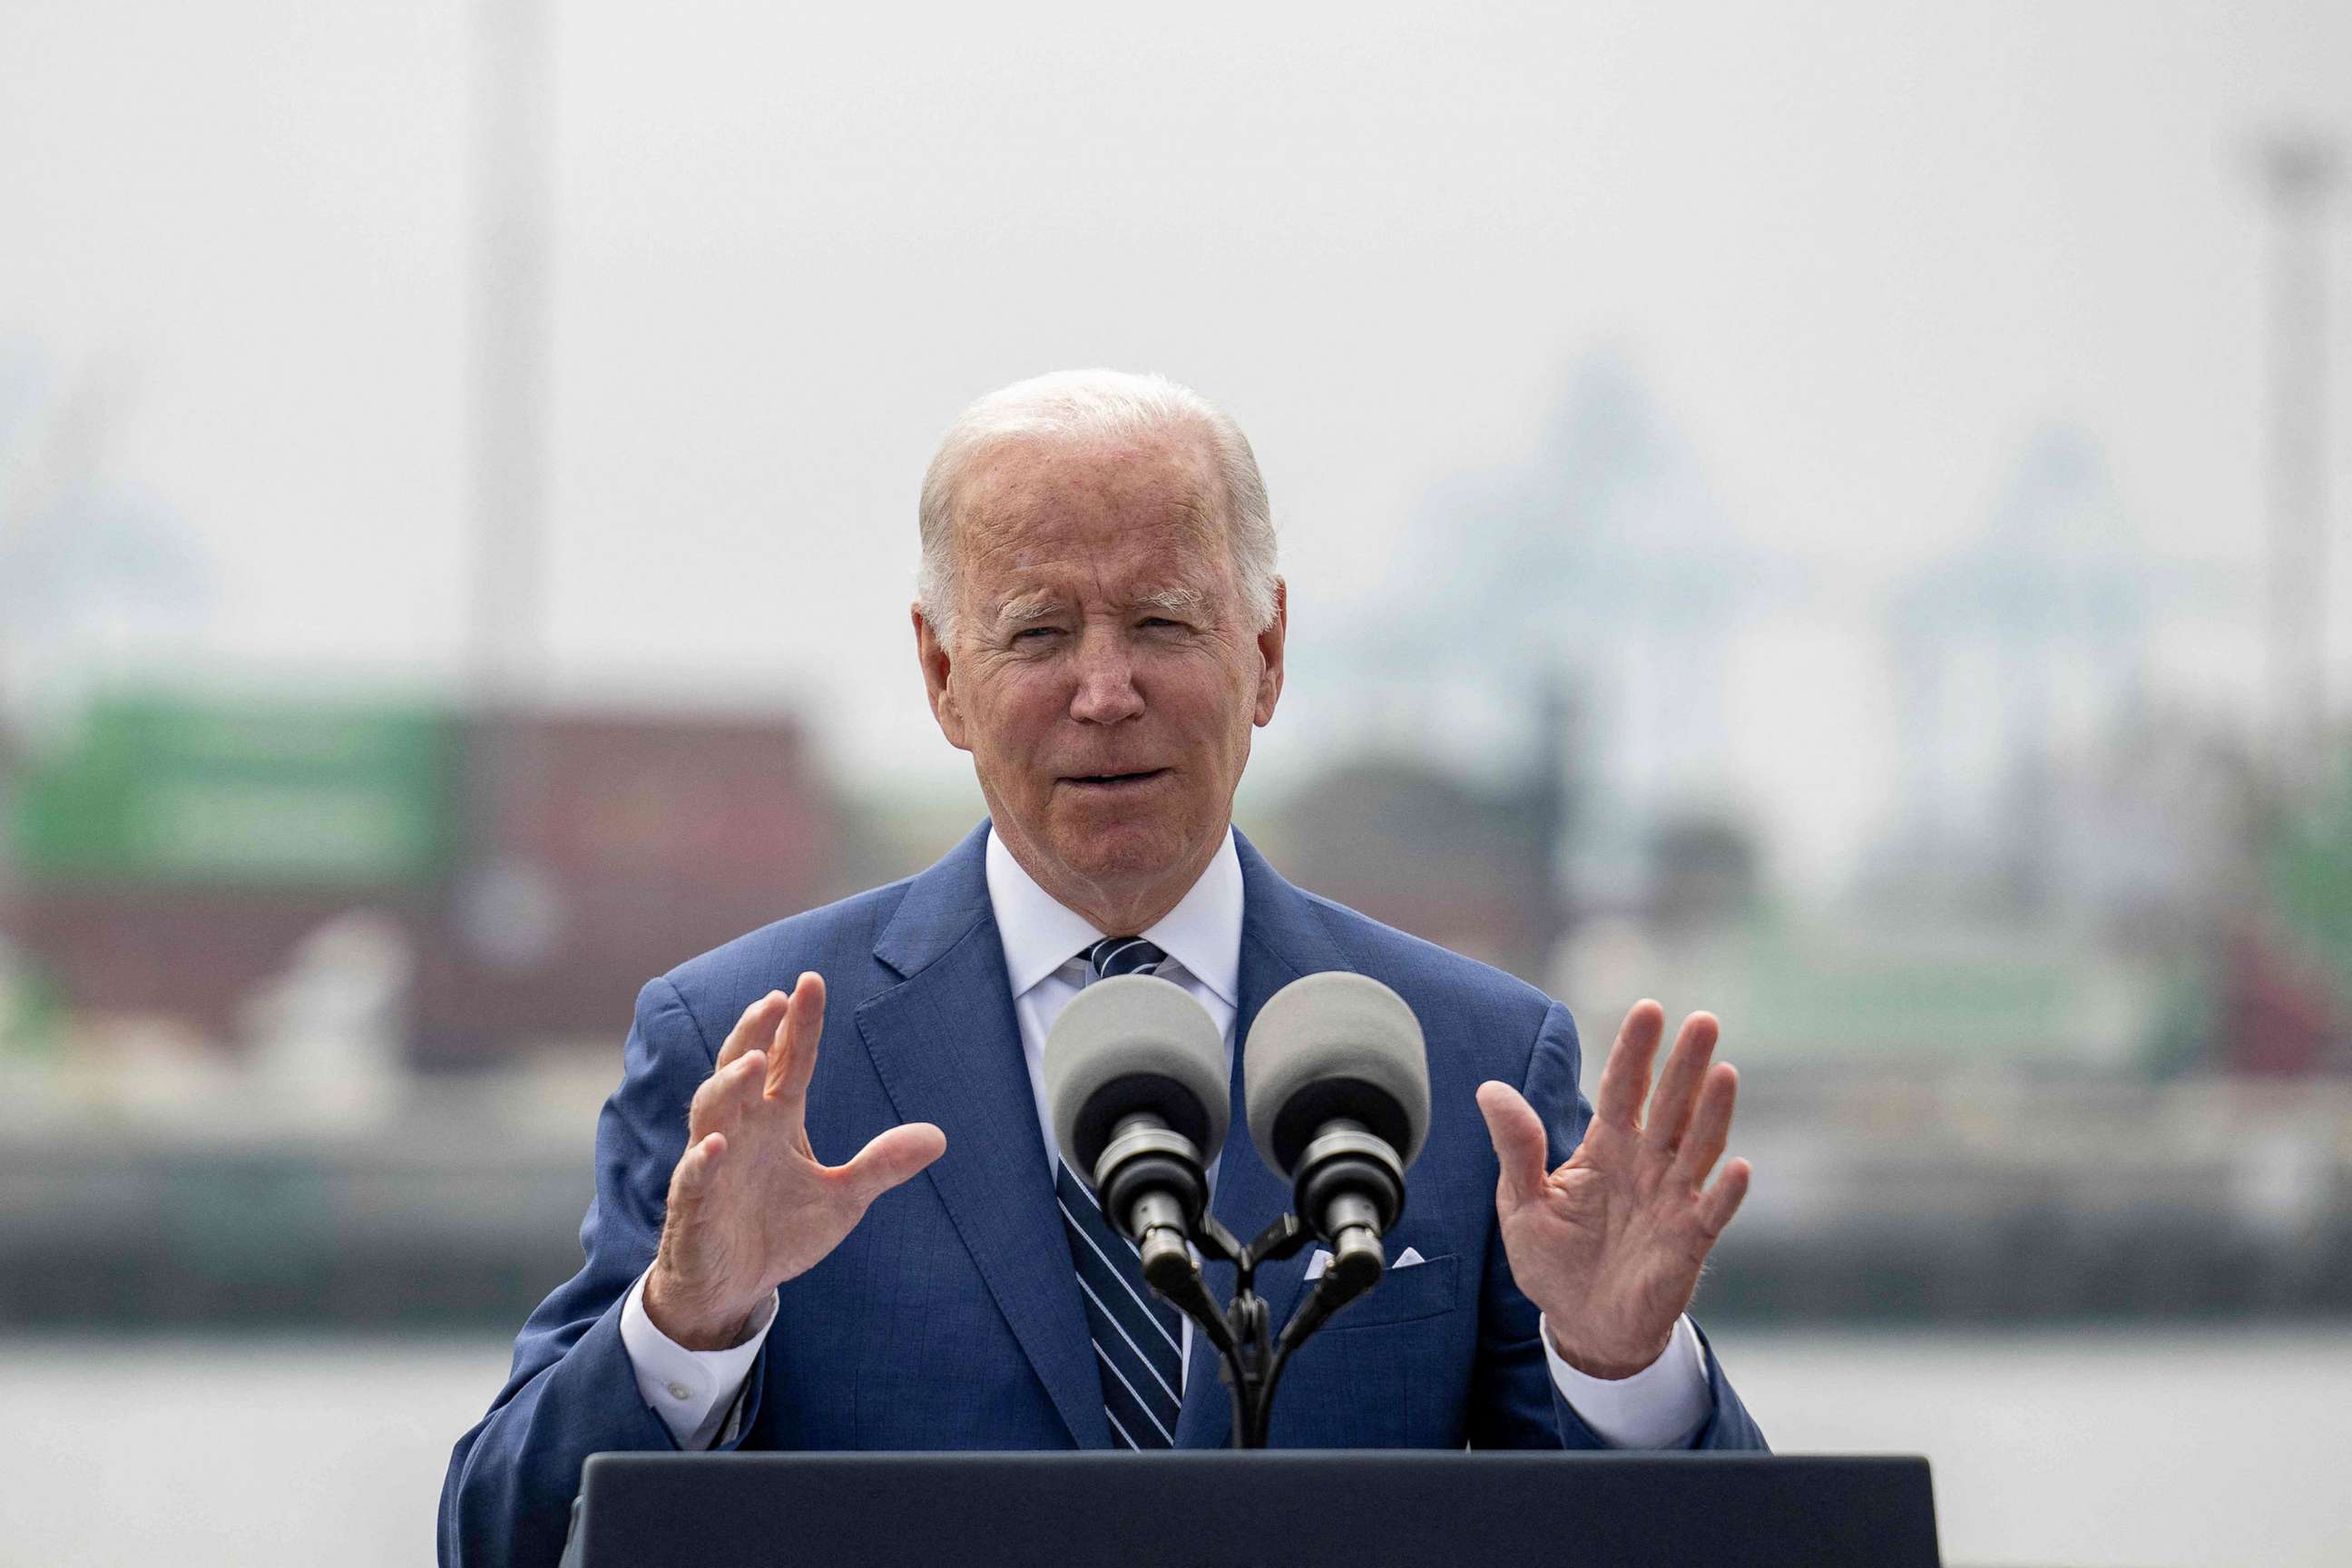 PHOTO: President Joe Biden speak about the economy and inflation from the deck of the USS Iowa at the Port of Los Angeles, June 10, 2022.